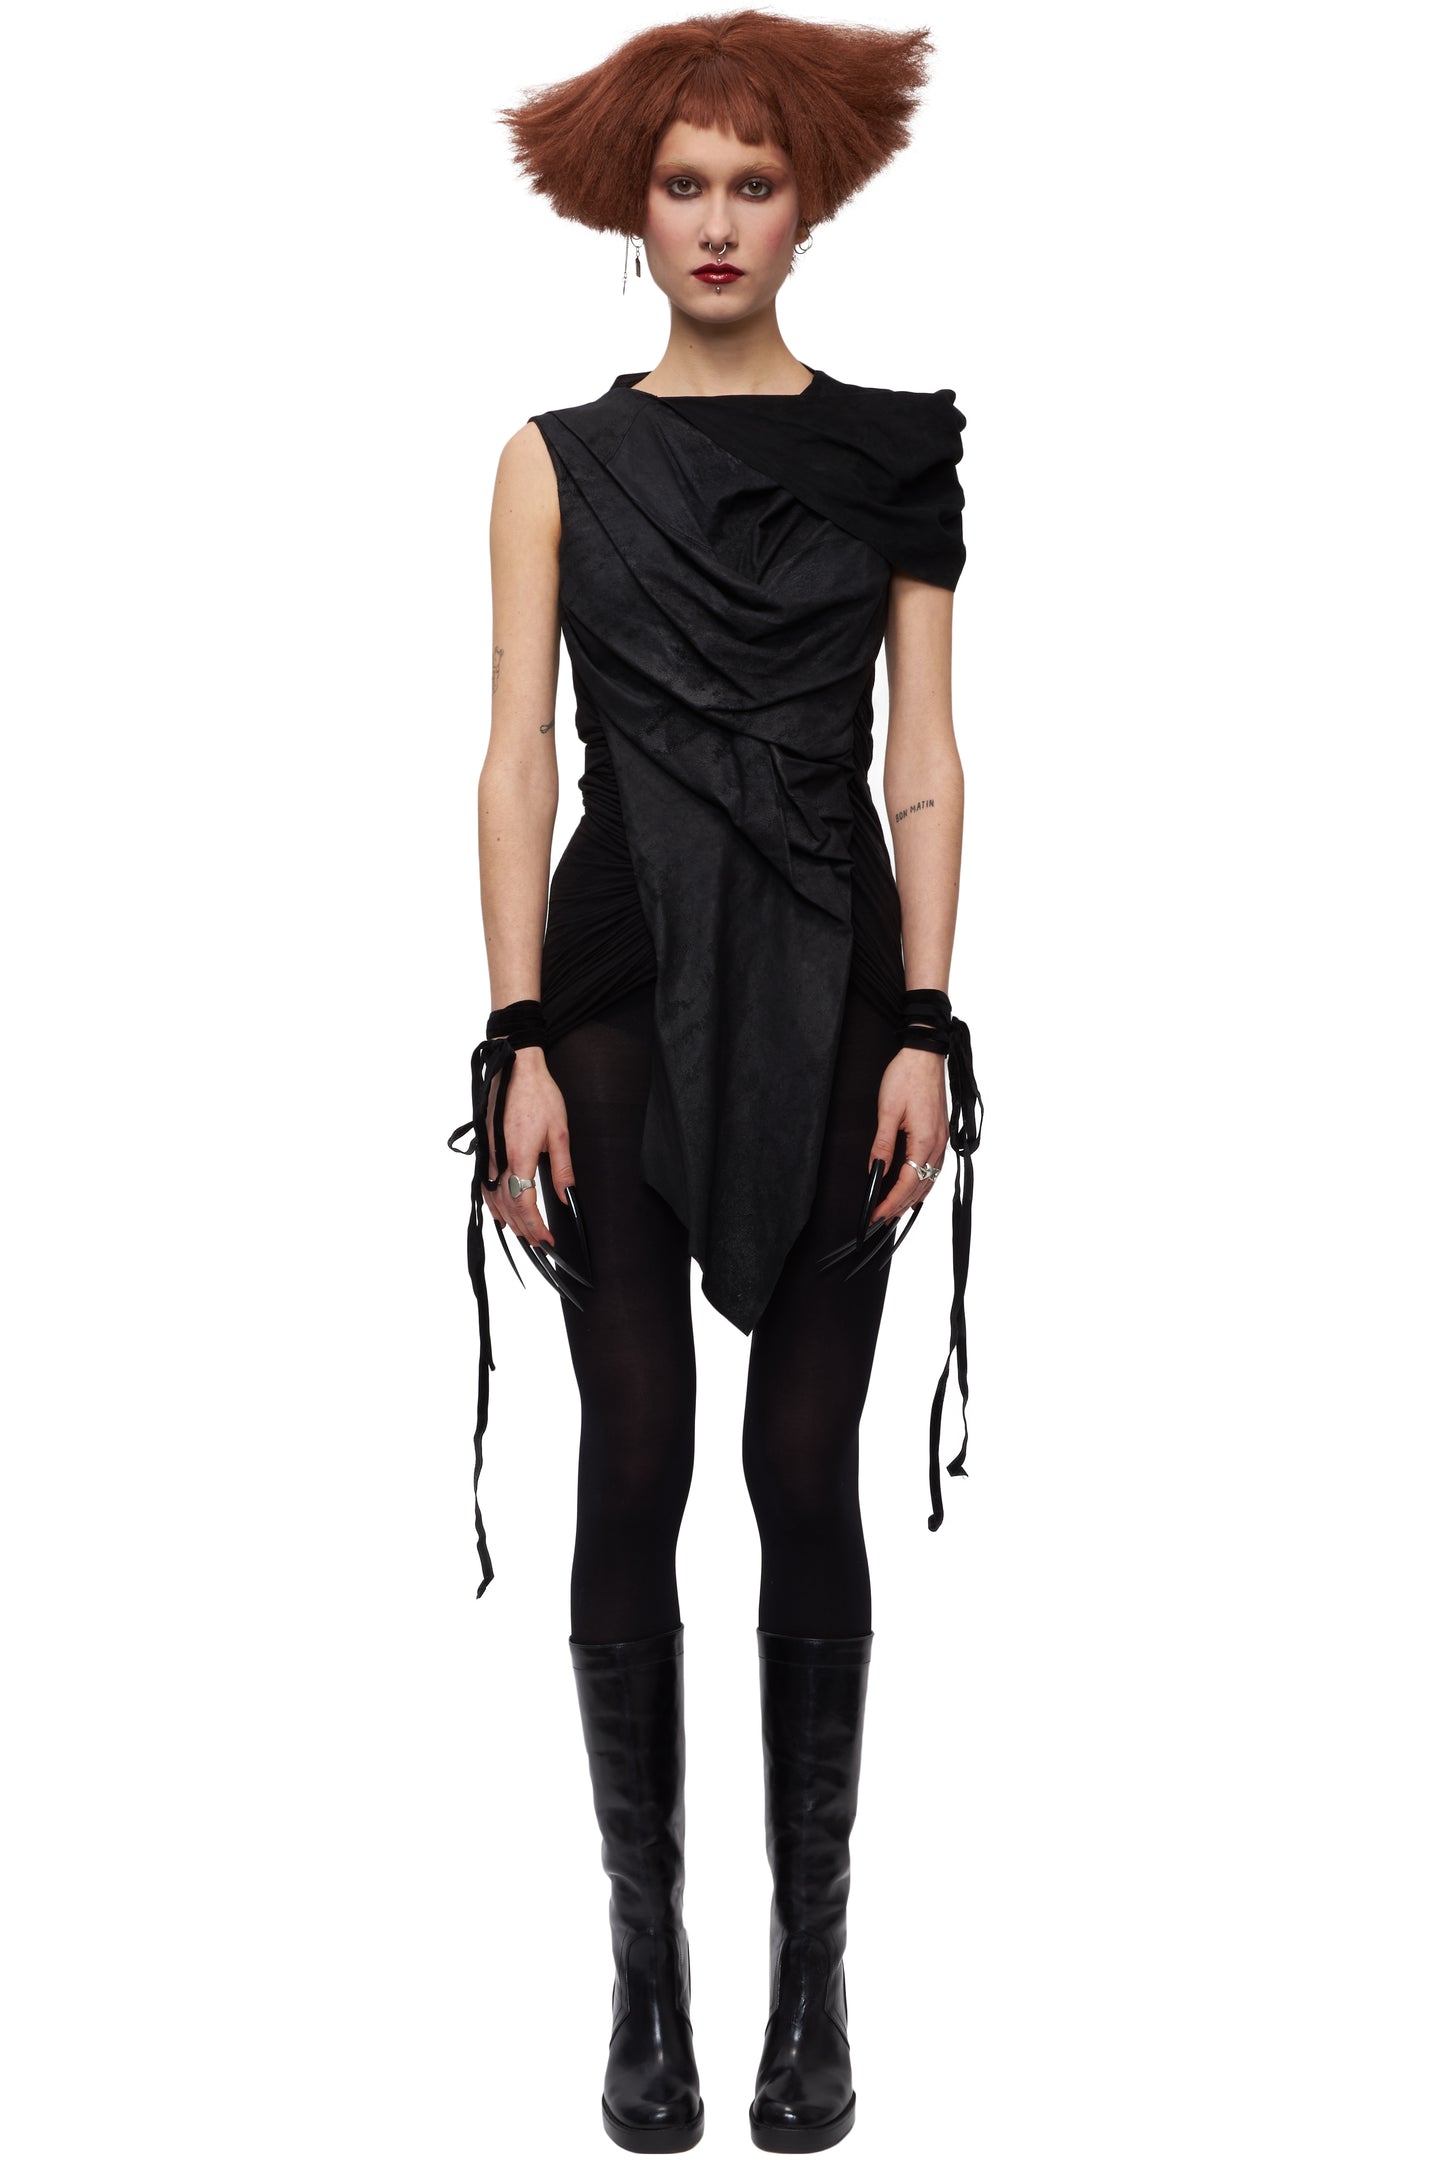 RICK OWENS SS10 'RELEASE' DRAPED LEATHER DRESS